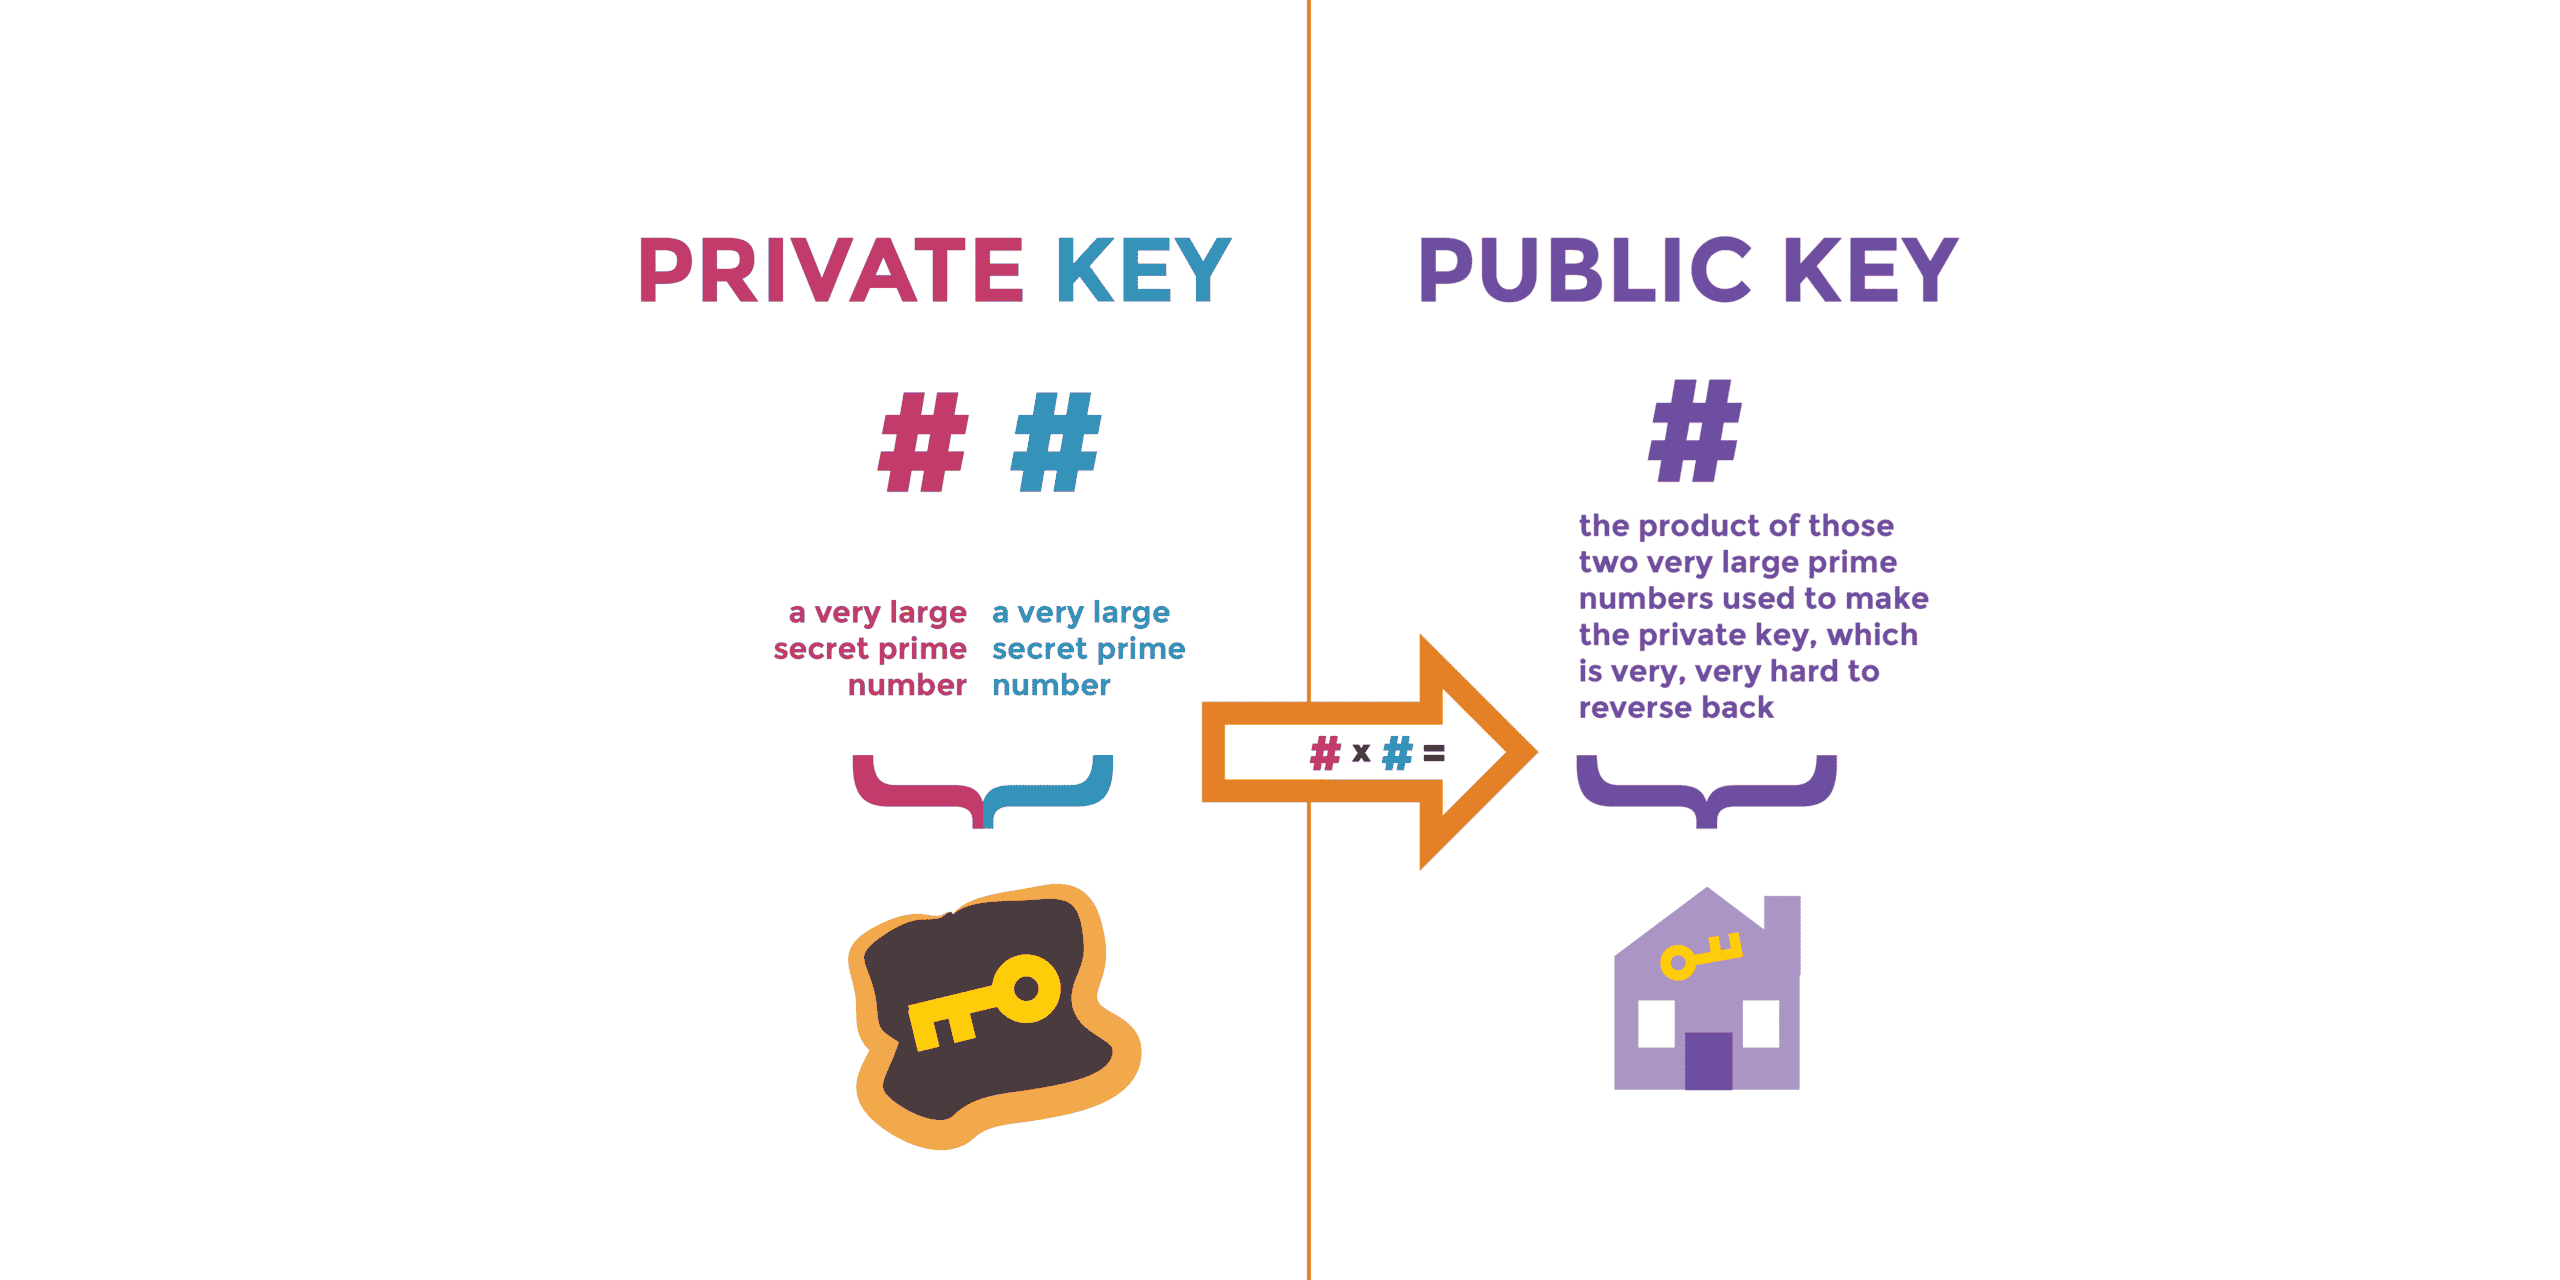 WHAT DOES THE ENCRYPTION OF PUBLIC KEYS CONSIST OF?